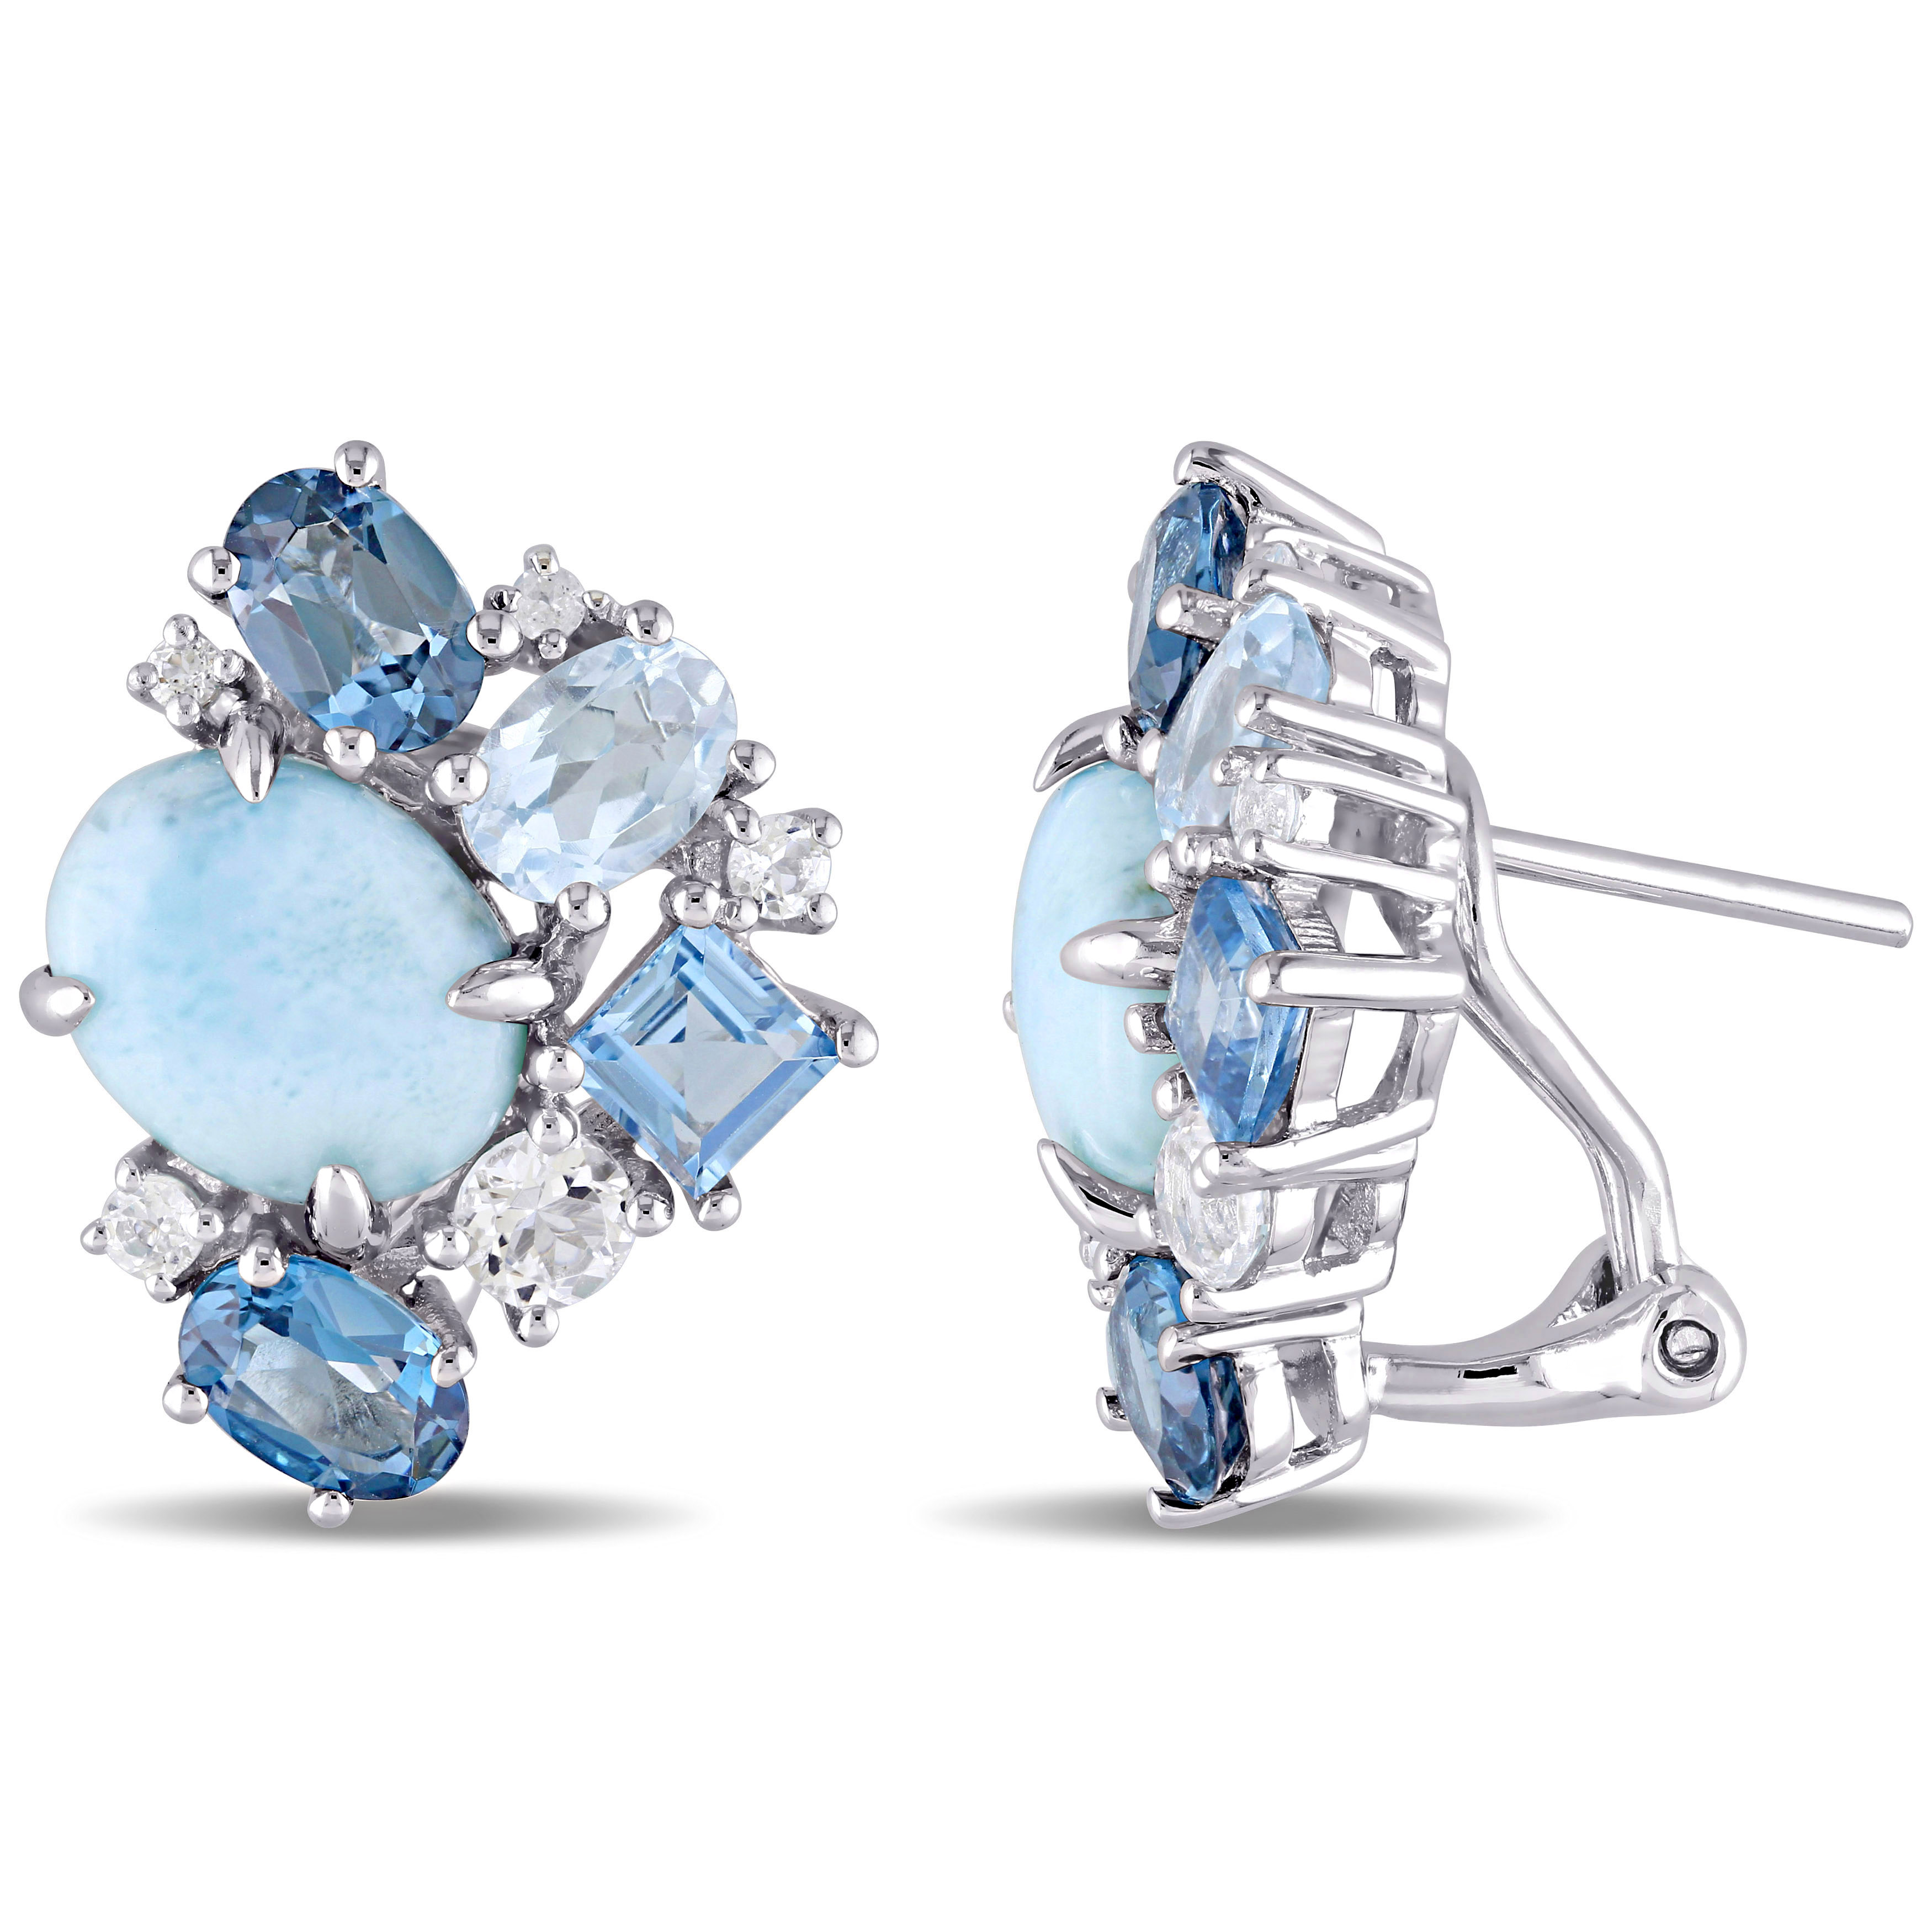 11 CT TGW Larimar, London, Sky Blue and White Topaz Cluster Earrings in Sterling Silver